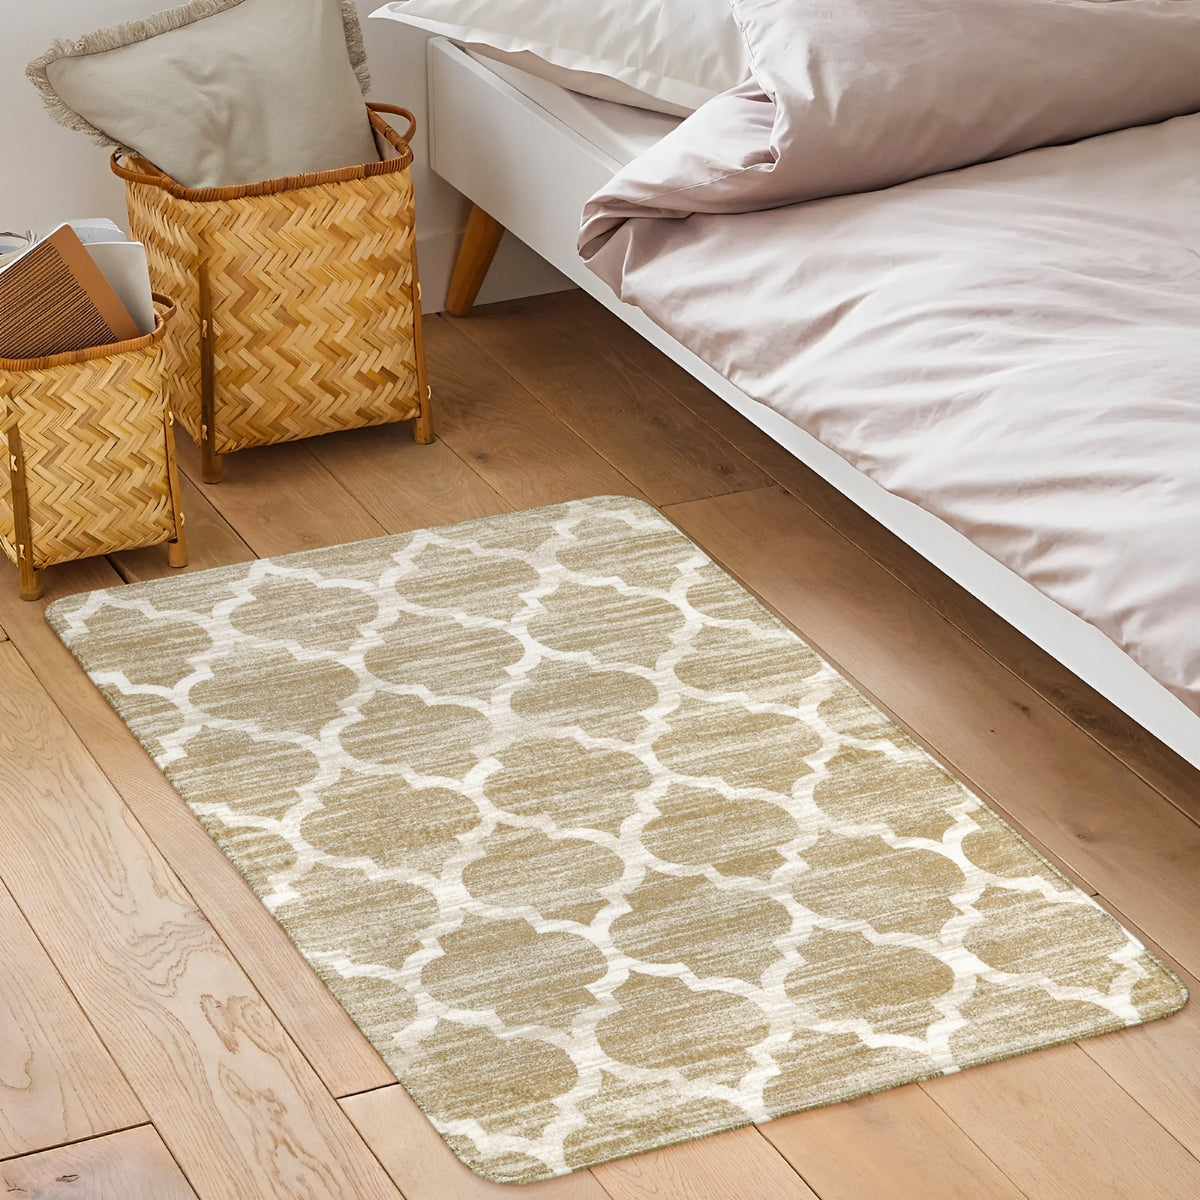 Lahome Moroccan Trellis Area Rug - 2x3 Small Throw Rugs for